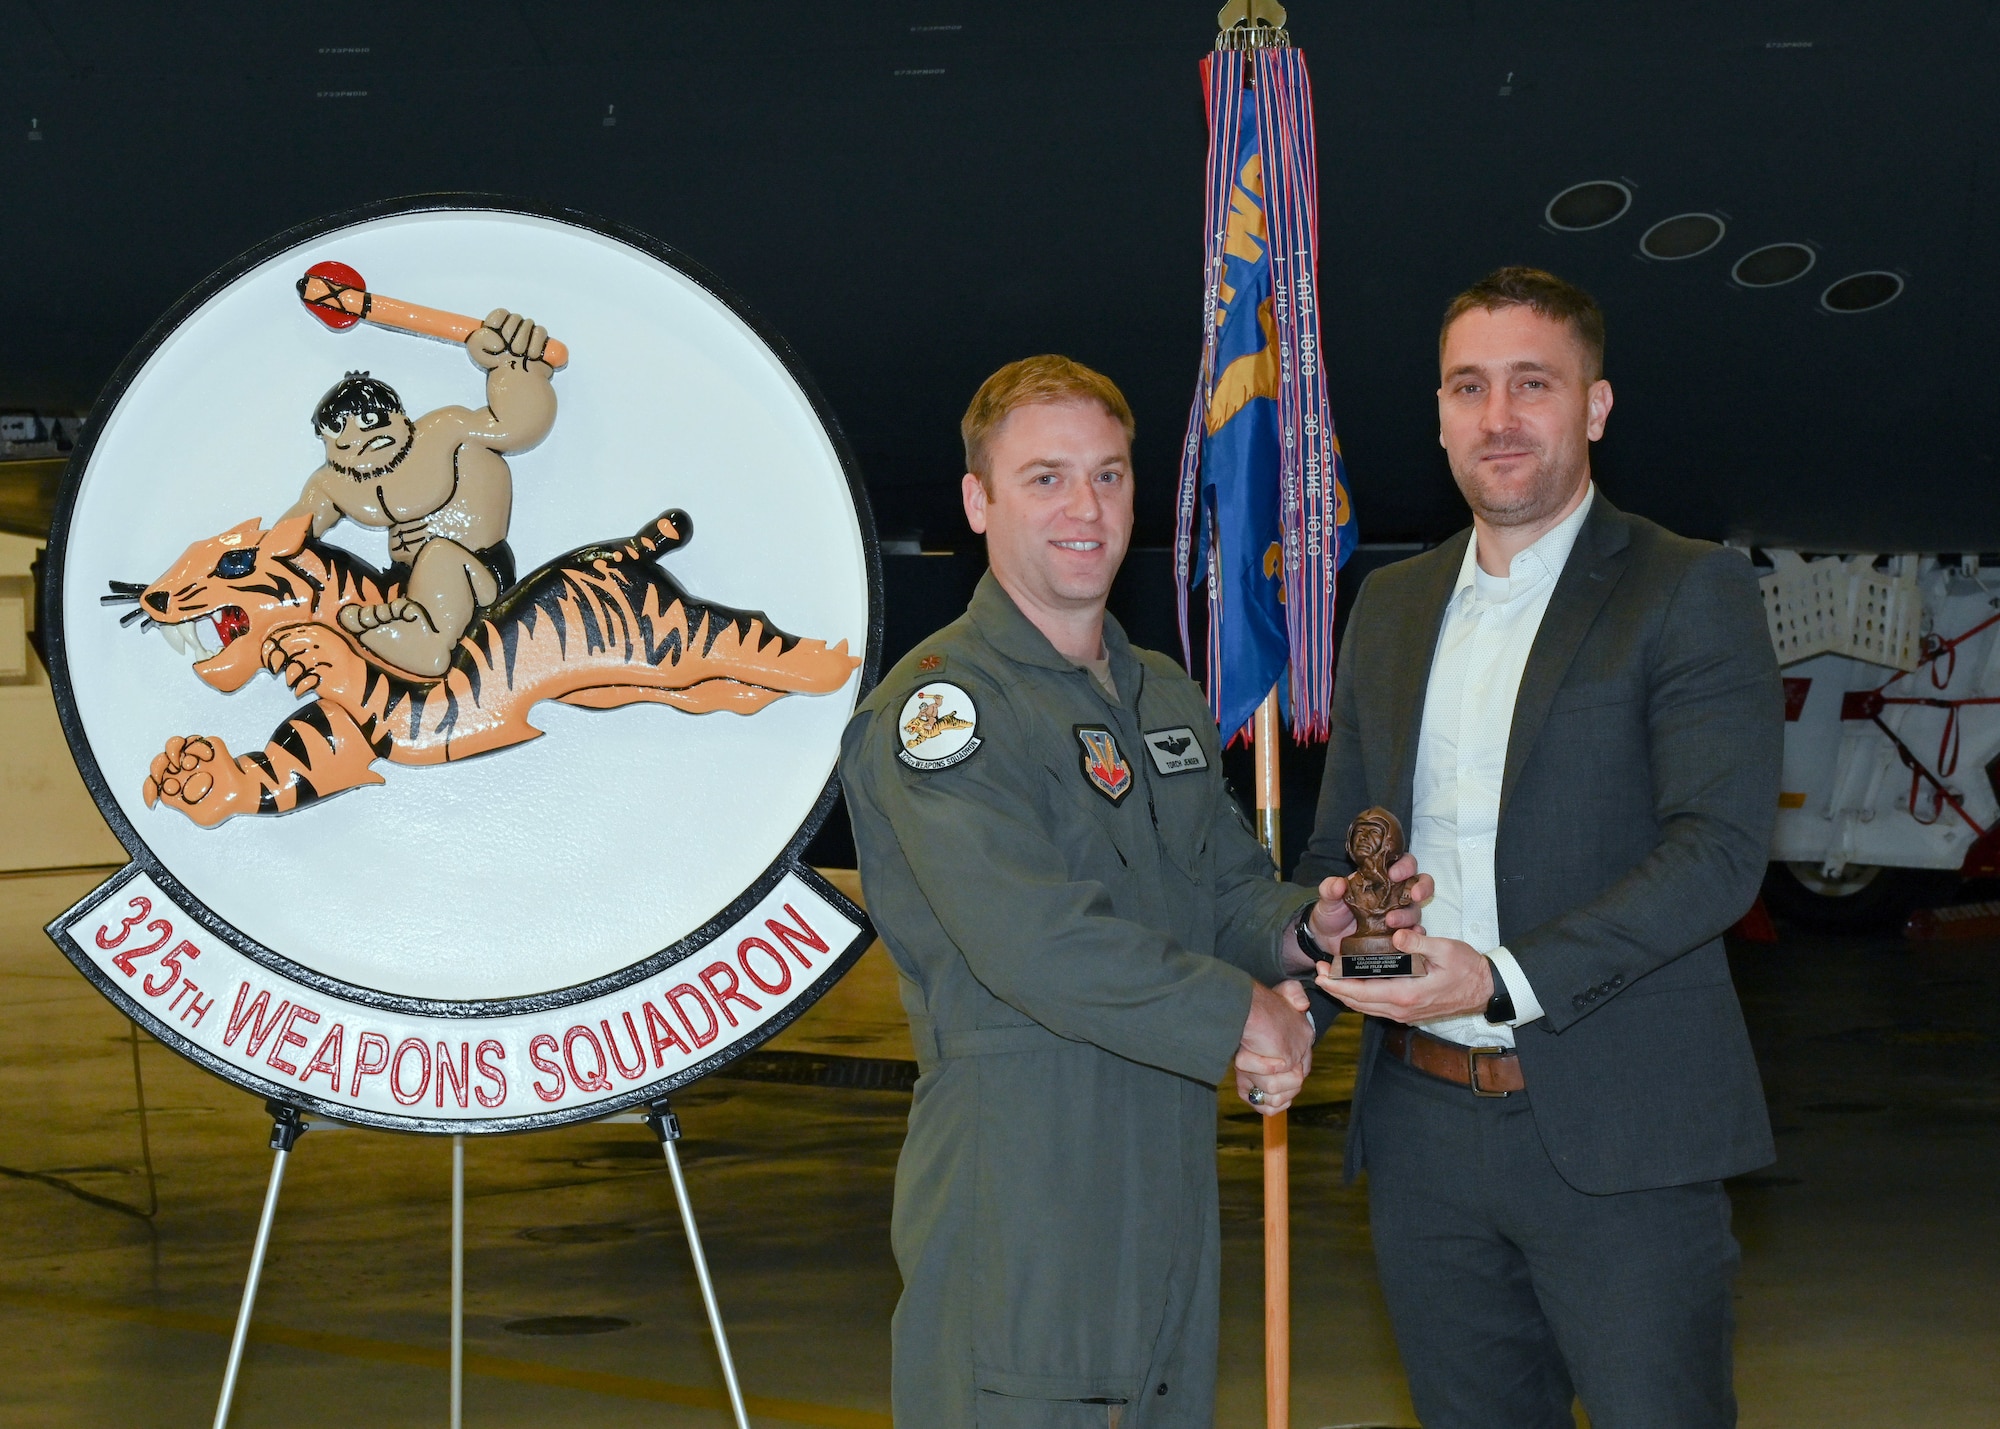 Patrick McGeehan, son of Lt. Col. Mark McGeehan, presents an award named for his father to Maj. William Jensen, assistant director of operations, 325th weapons squadron at Whiteman Air Force Base, Mo., Dec. 13, 2022. Jensen was selected for the inaugural ceremony for his leadership and innovation with the 325th WPS. (U.S. Air Force photo by Airman 1st Class Nash Truitt)